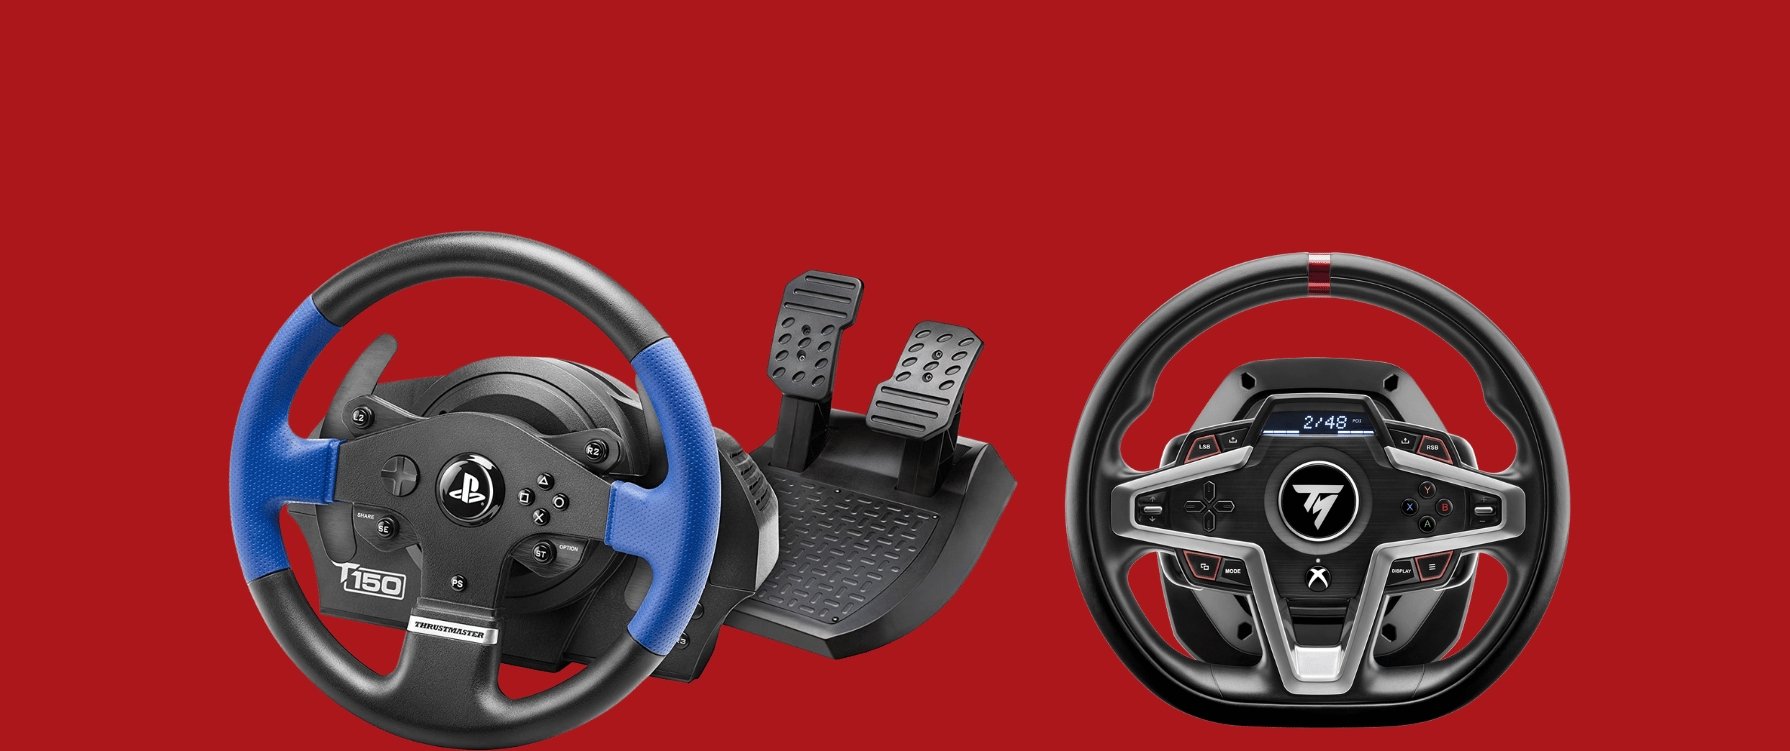 Get the Ultimate Racing Experience with Thrustmaster Wheels - Expert Tips for Maximum Performance - Techachi